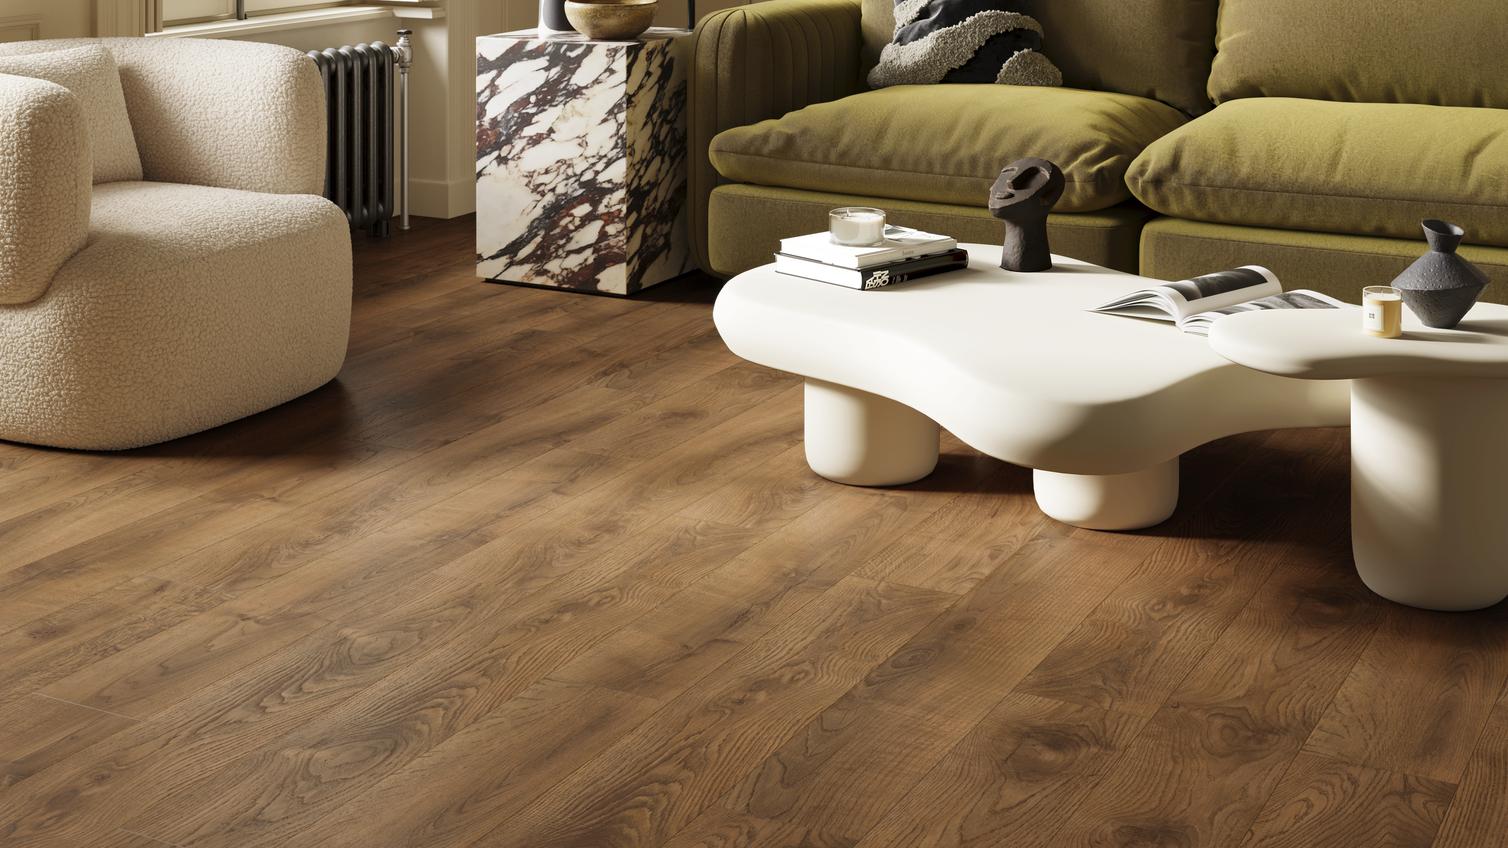 Oake and Gray Traditional Oak Laminate Flooring in A Living Room